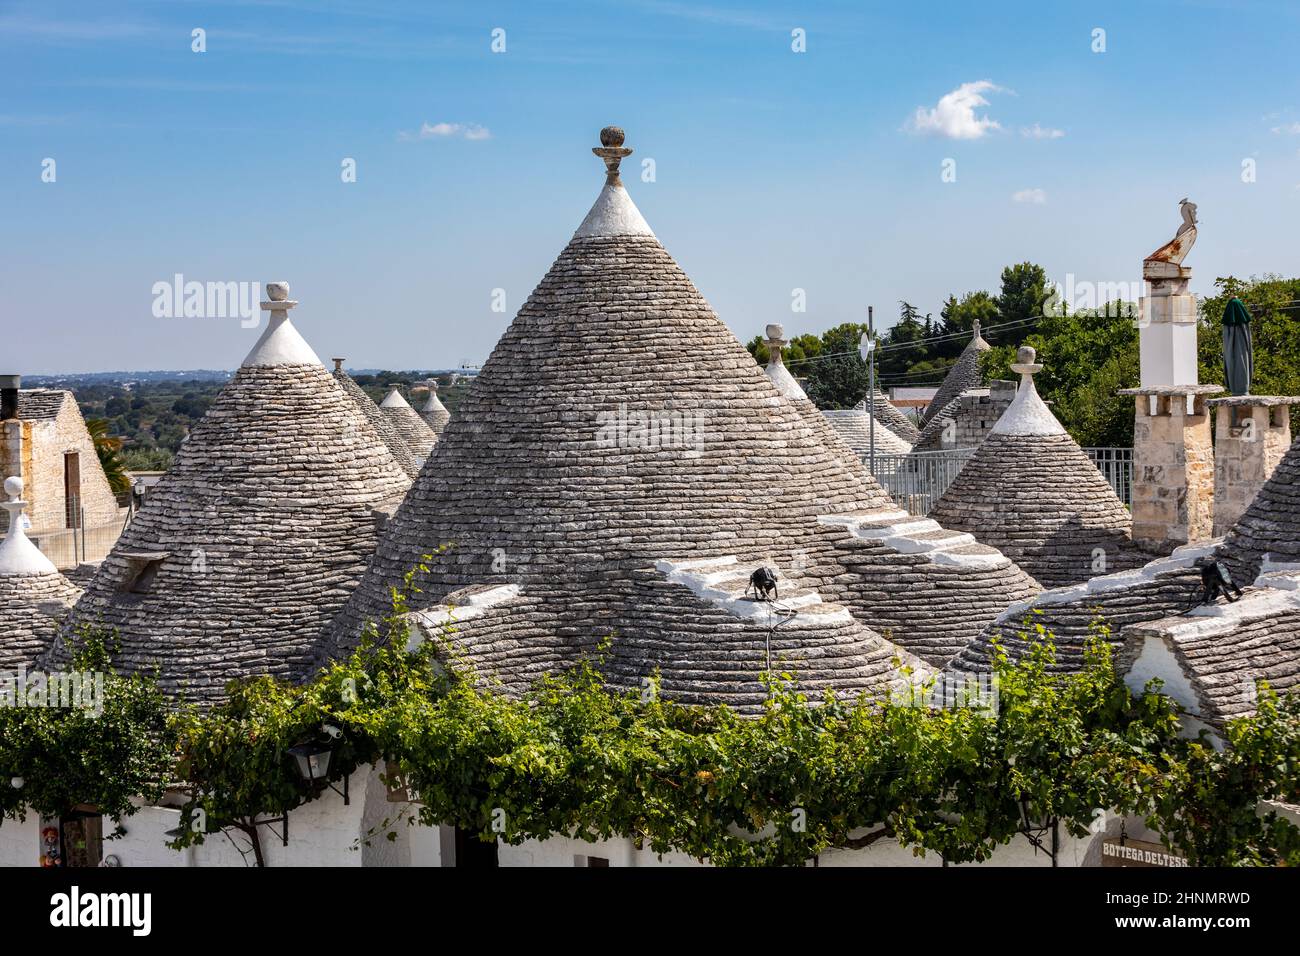 Grapevines on the stone roof of Trulli House in Alberobello, Italy. Stock Photo